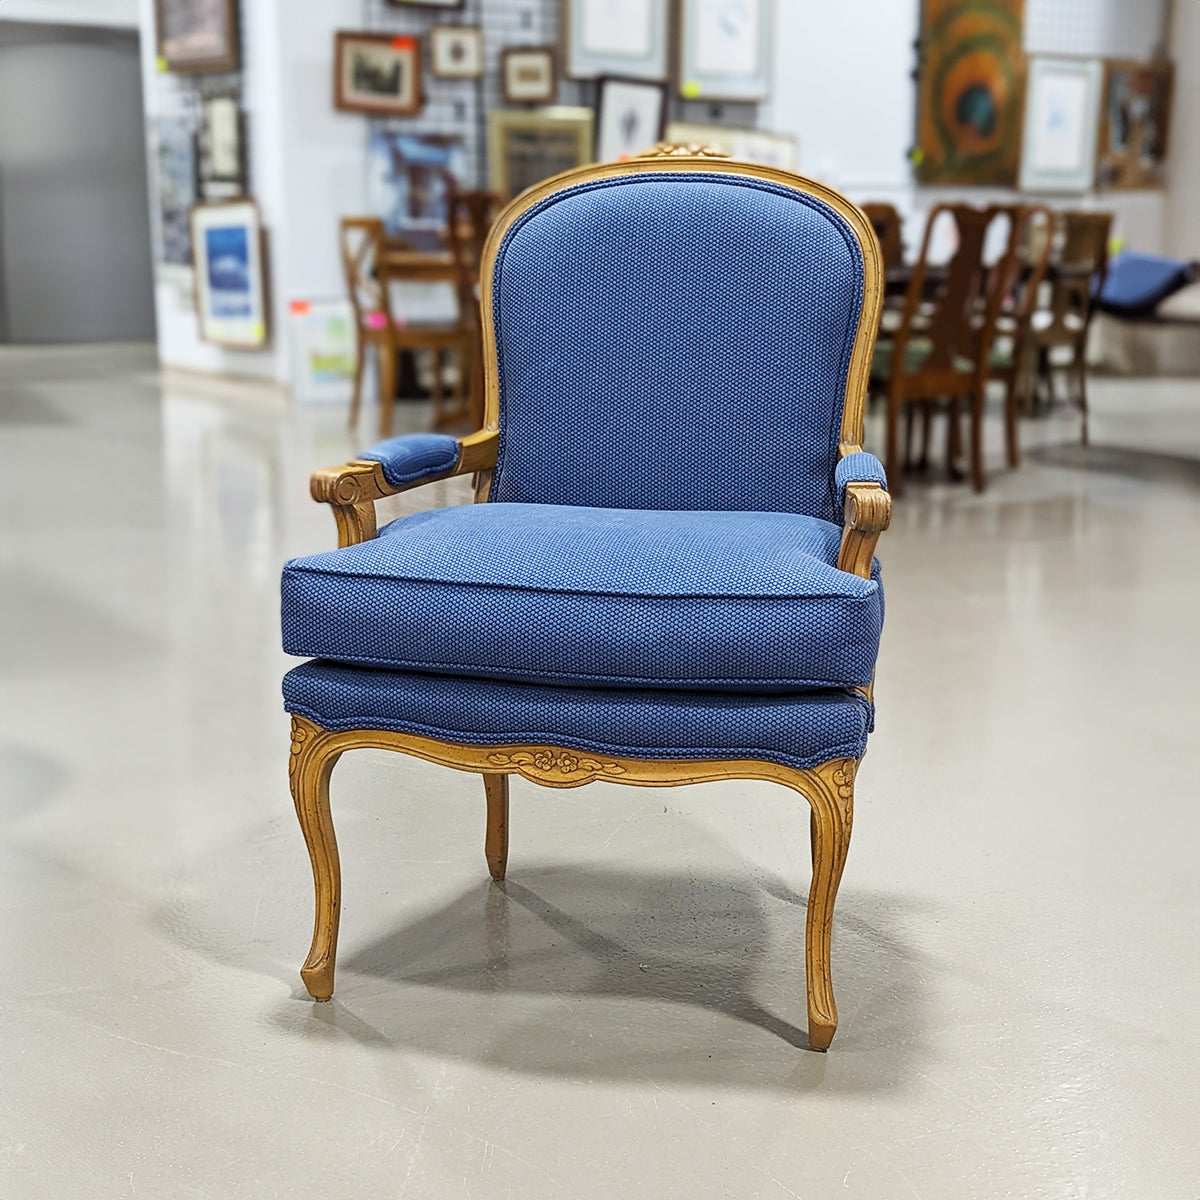 Blue French Provincial Style Armchair - Habroc - Online ReStore